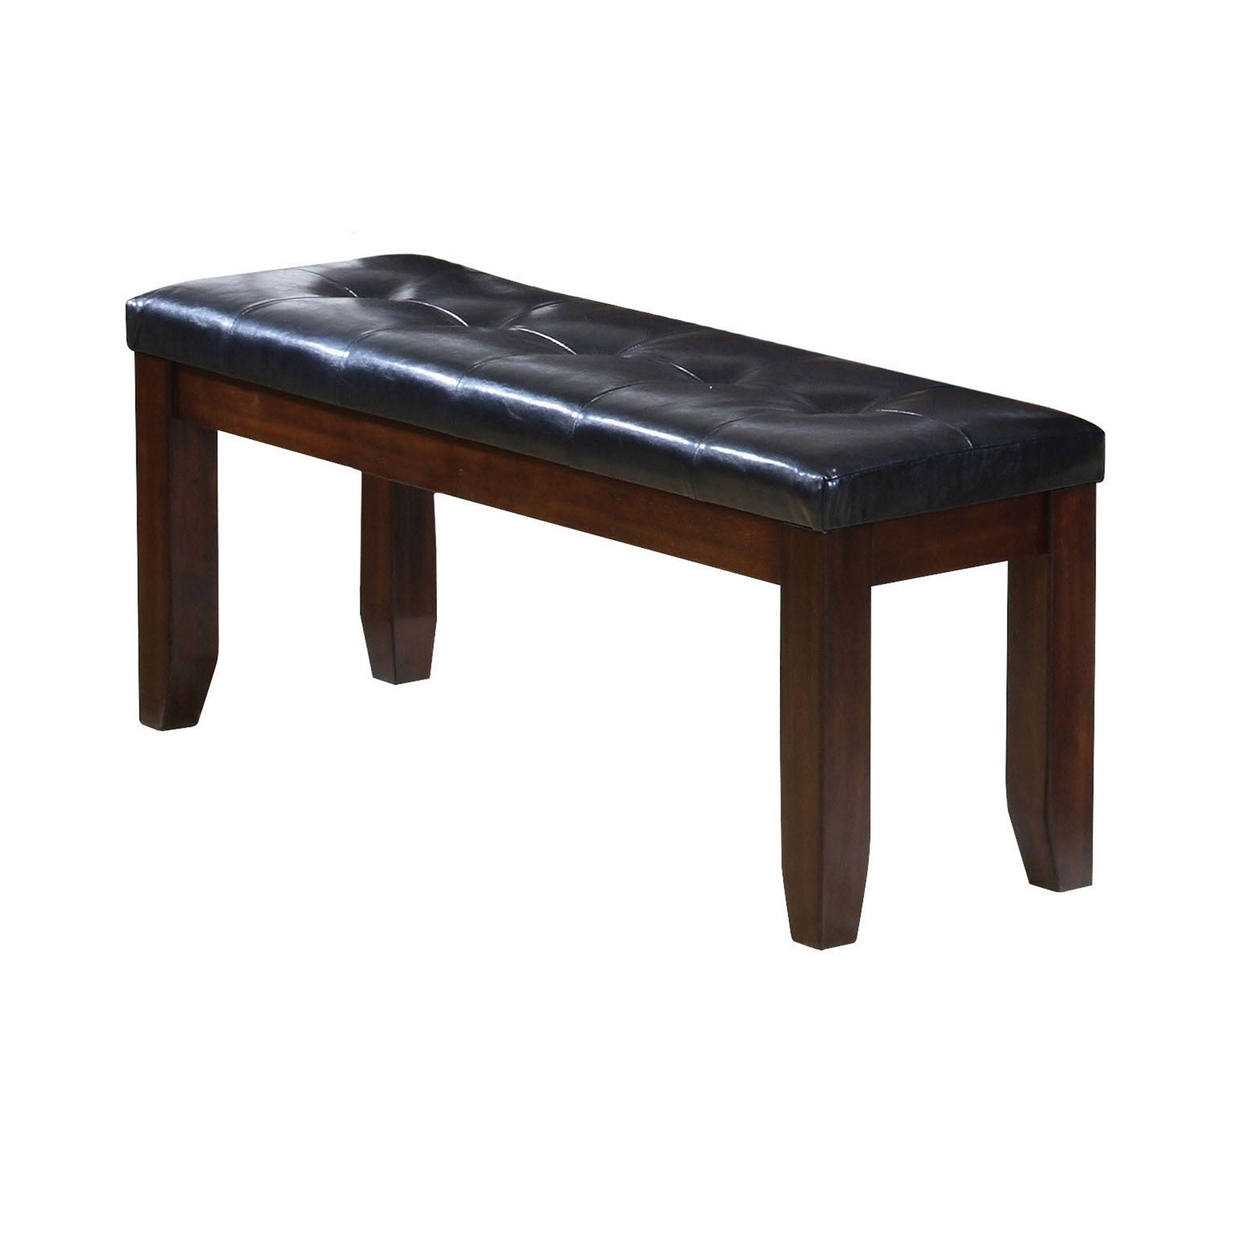 Leather Upholstered Wooden Bench With Tufted Seat, Espresso Brown & Black- Saltoro Sherpi